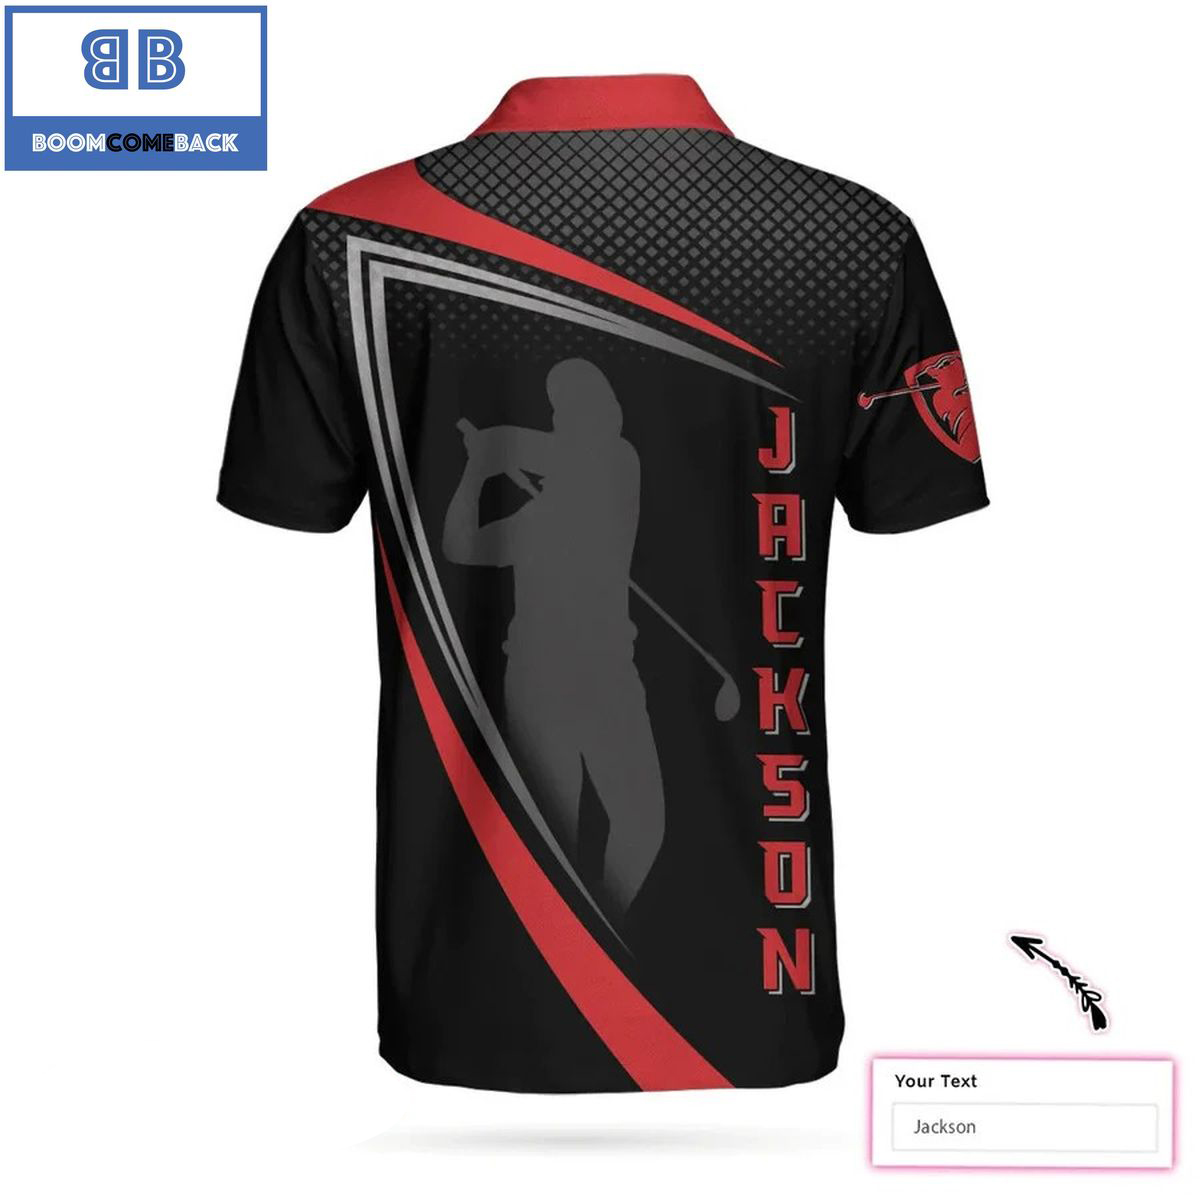 Personalized2BSport2BGolf2BWith2BGolfer2BSilhouette2BAthletic2BCollared2BMens2BPolo2BShirt2B4